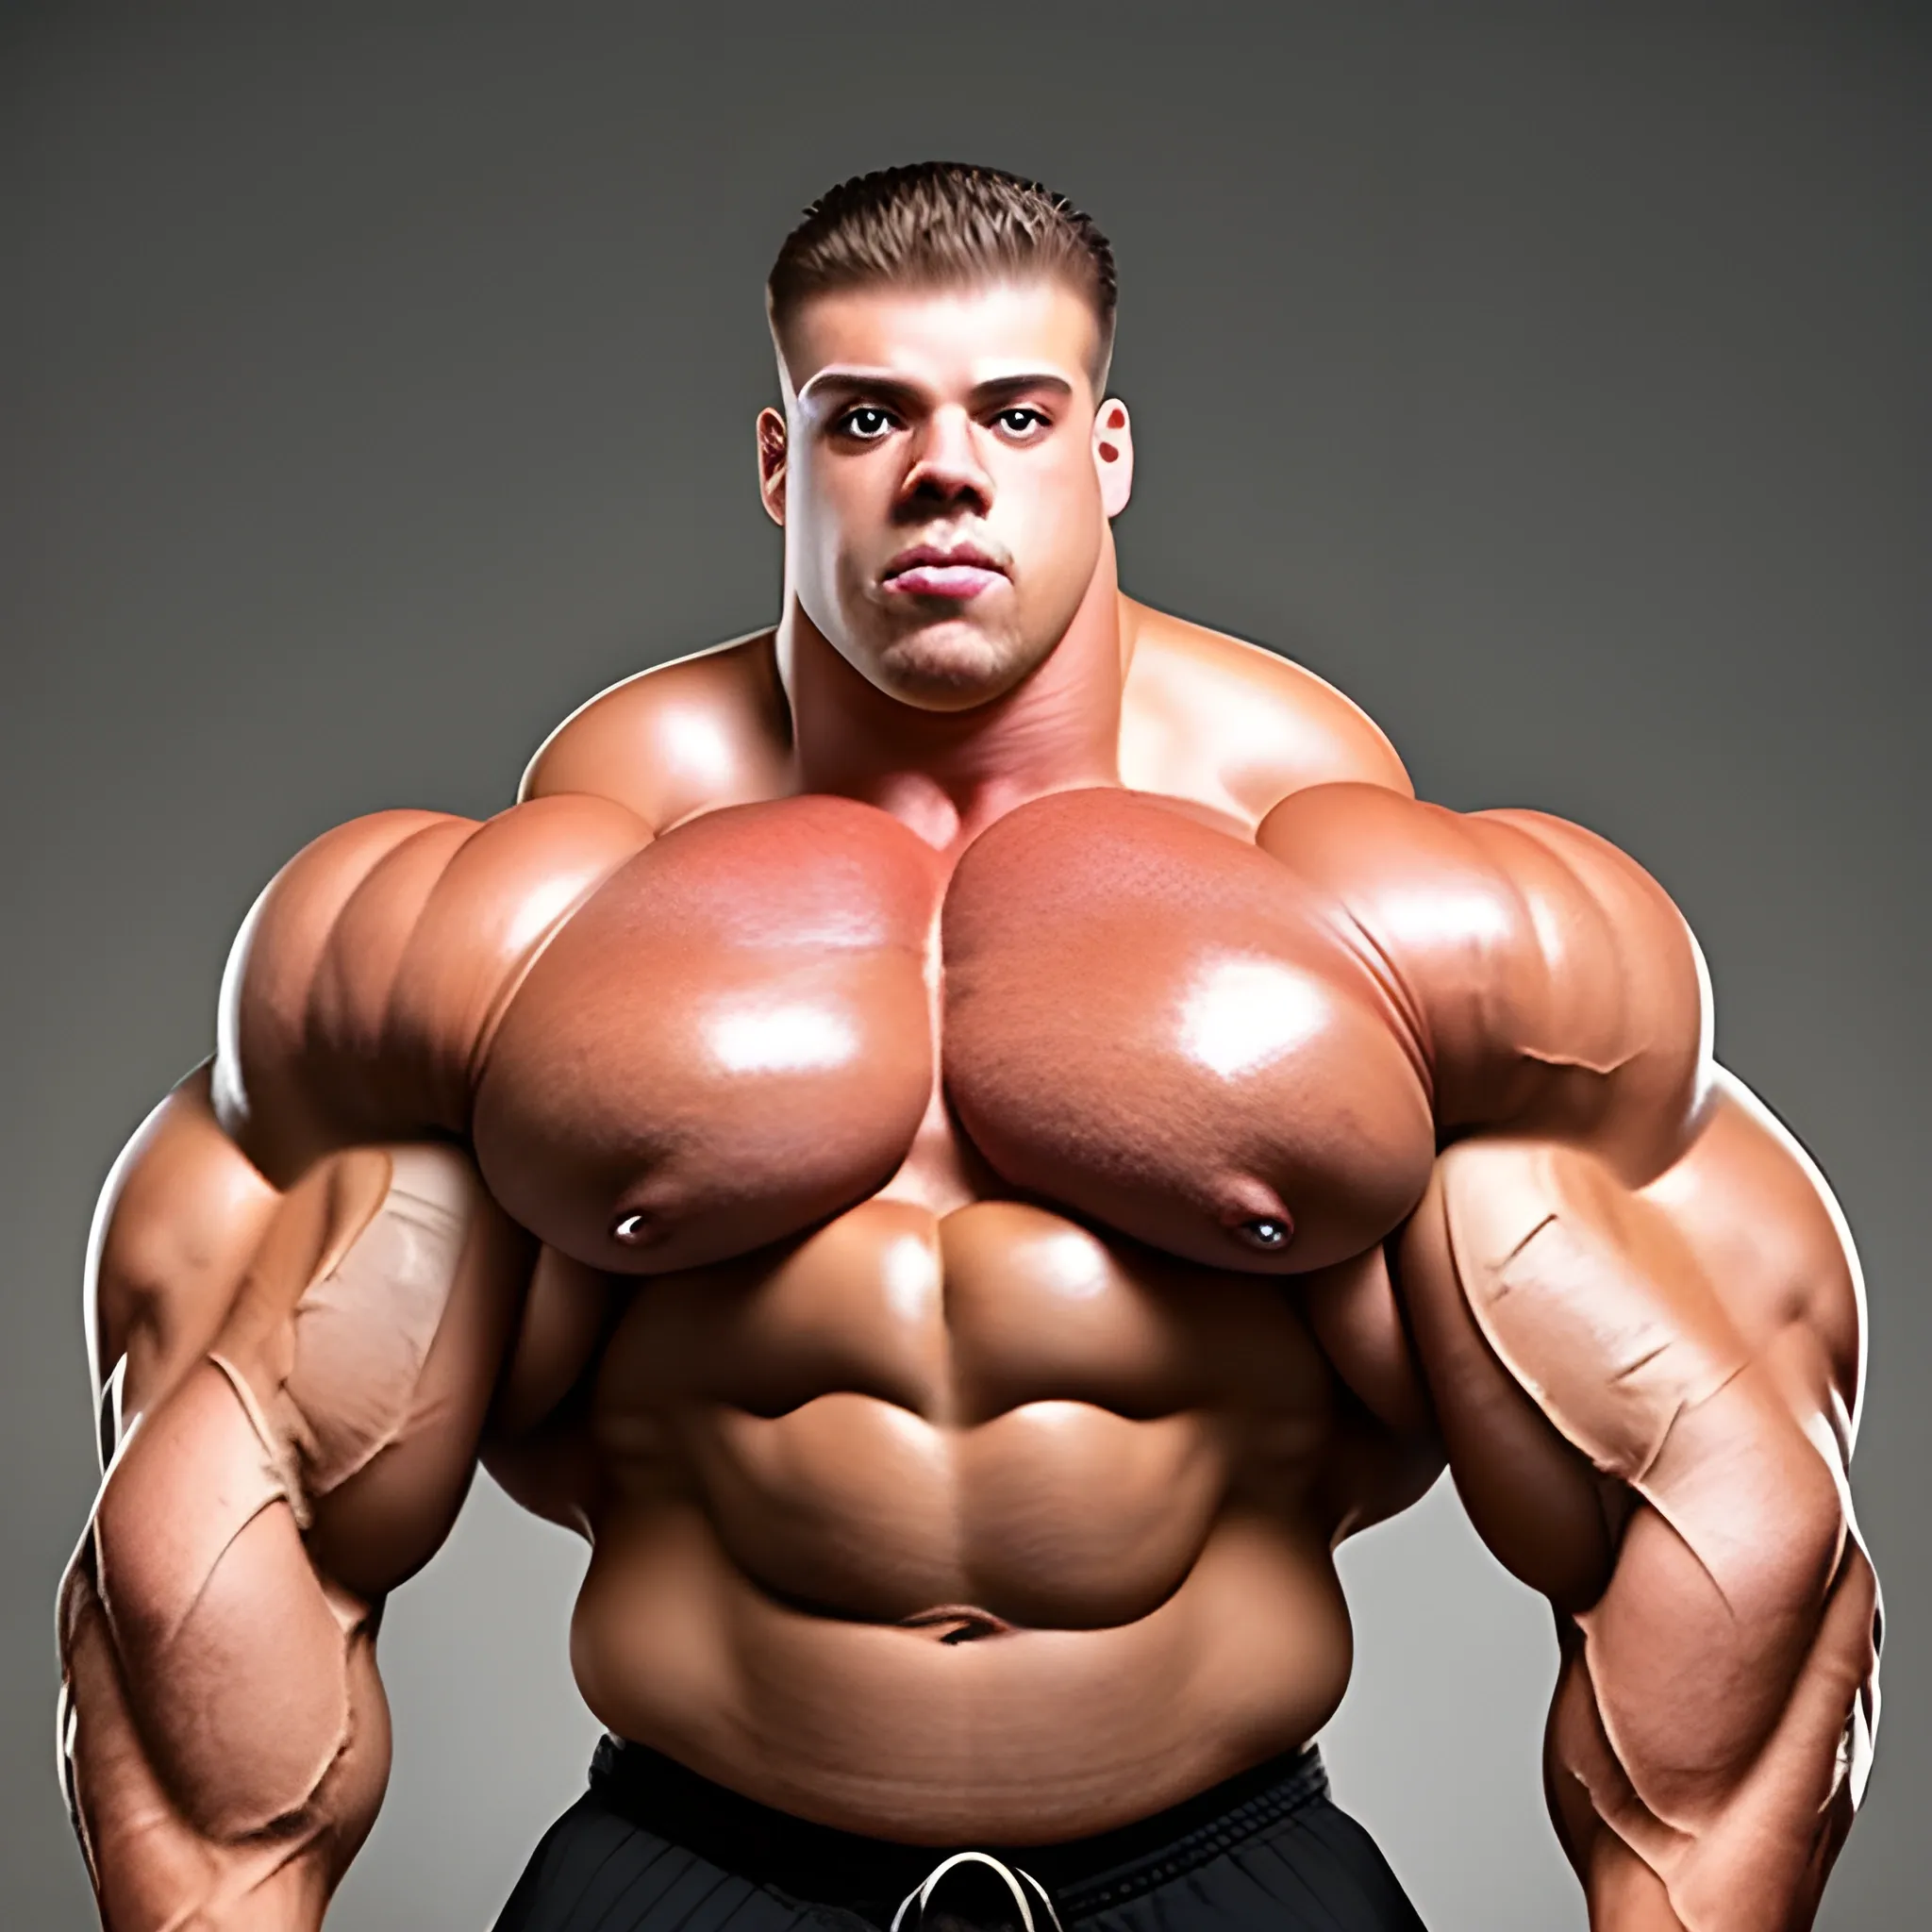 3-meters,  muscle morph, 3000 lbs bodybuilder, gigantic 300 inches biceps, huge biceps, 300 inches enormous triceps, , gigantic traps, 300 inches chest, 